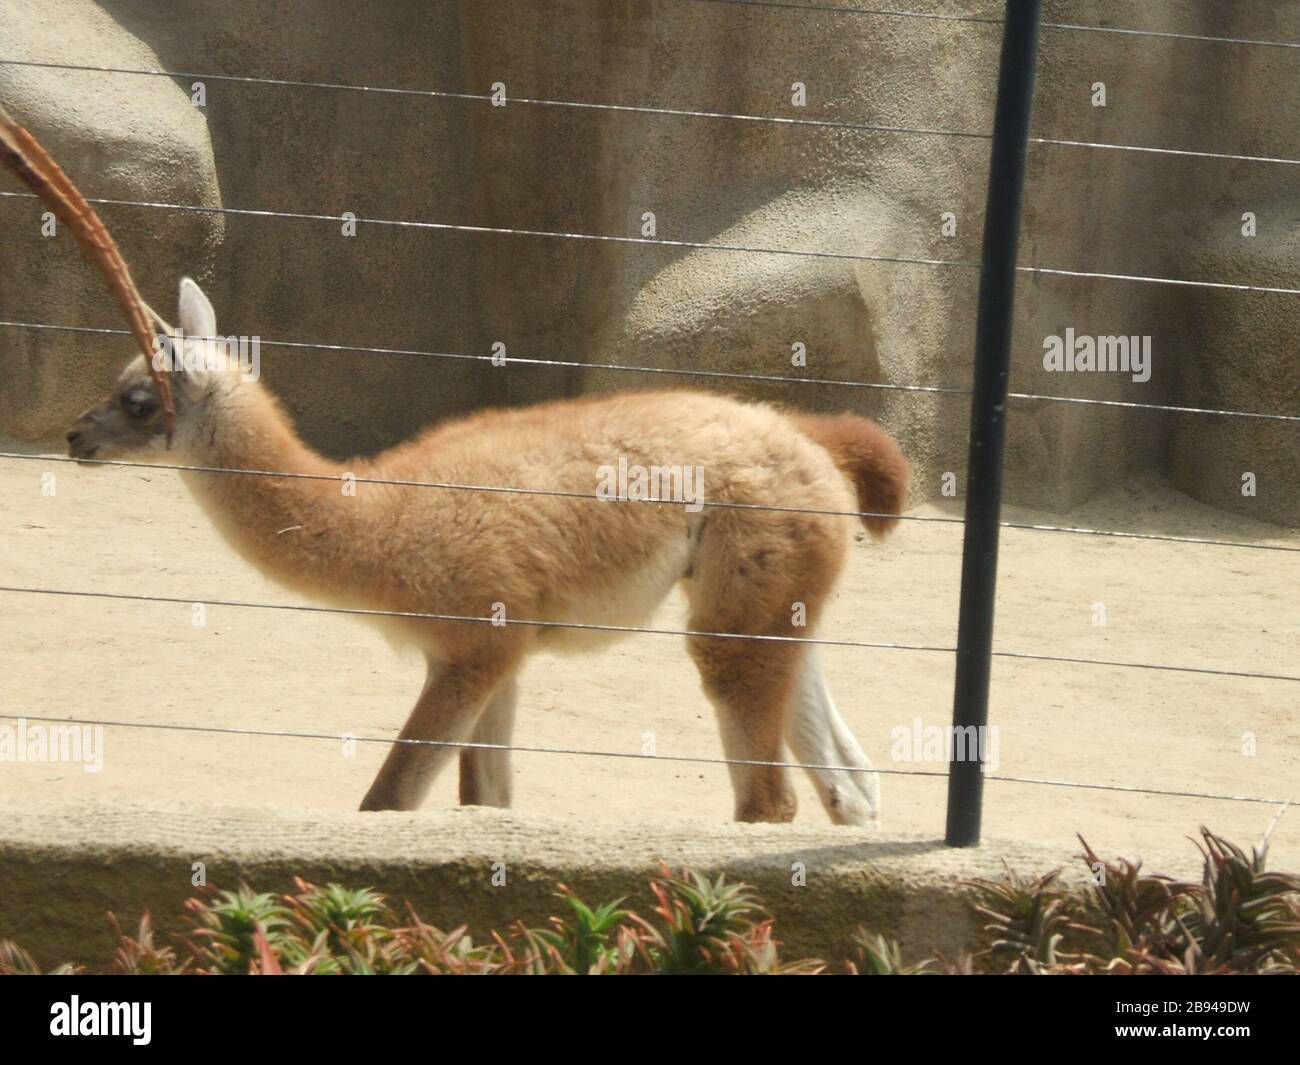 Awww High Resolution Stock Photography and Images   Alamy